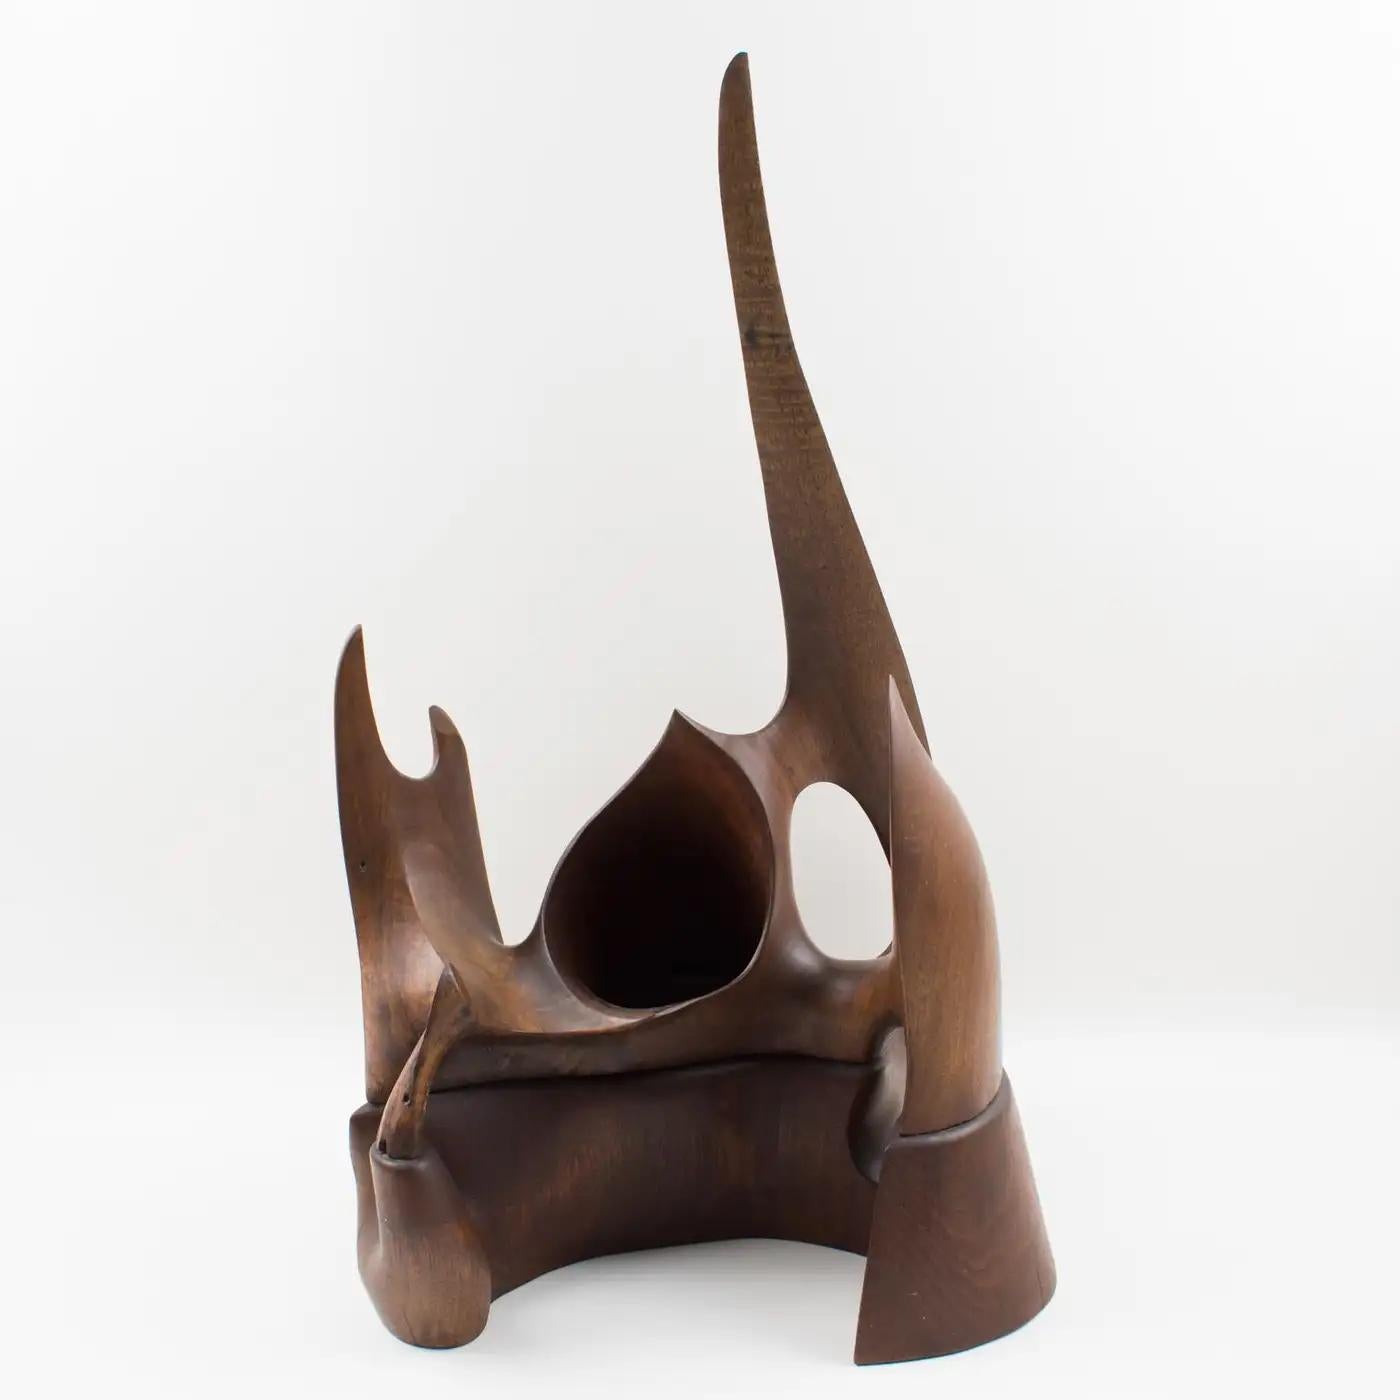 This brutalist architectural wood carving ornamental sculpture is entirely handmade and hand-carved and has an incredible futuristic flair with an elegant original patina. It is almost impossible to describe the shape, each side offers a different